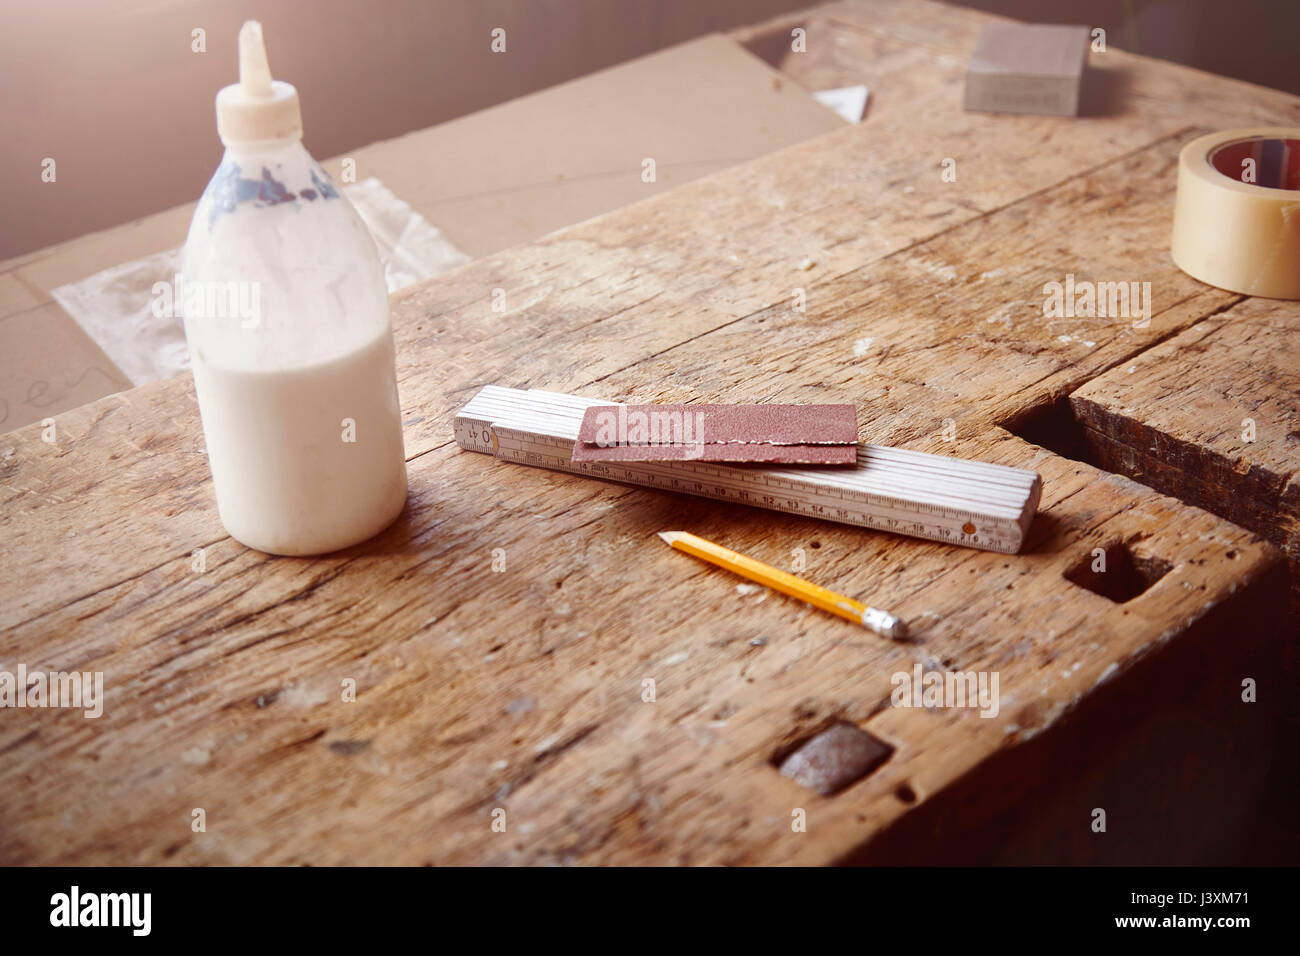 Carpenter's workbench with glue, sandpaper and tape measure Stock Photo